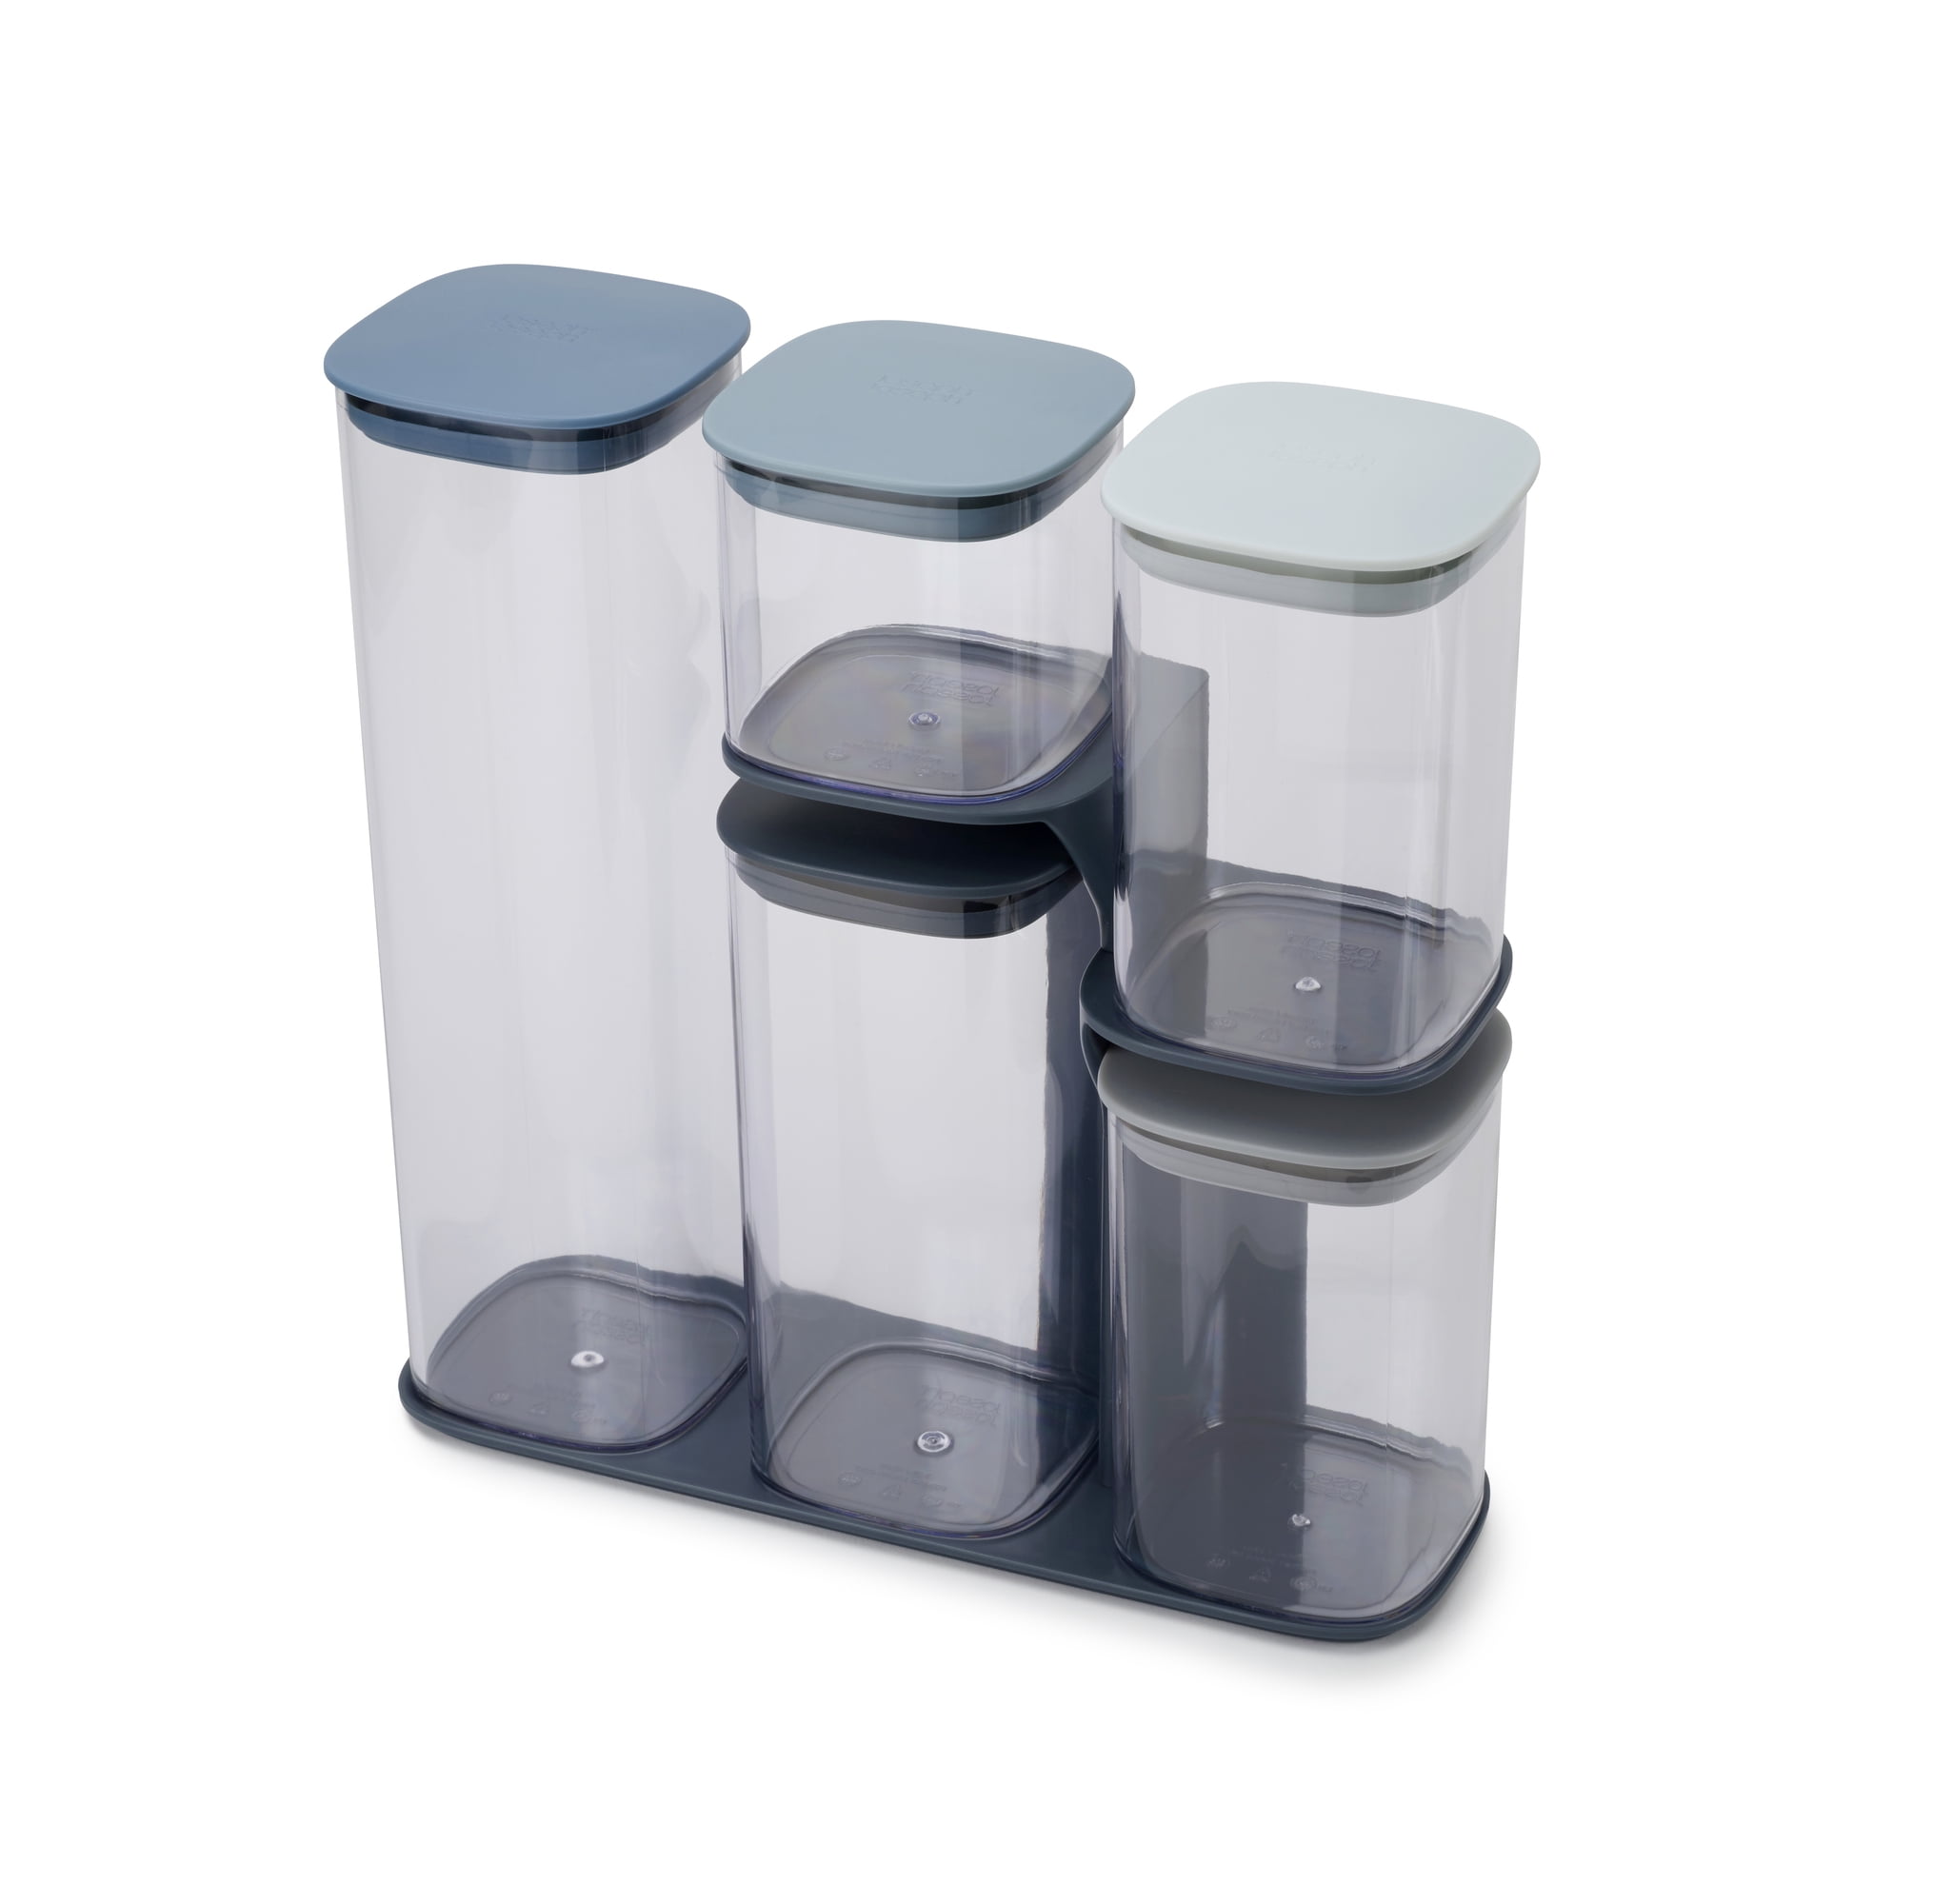 Joseph Joseph Dial 5 Piece Stage 2 Datable Baby Food Container Set